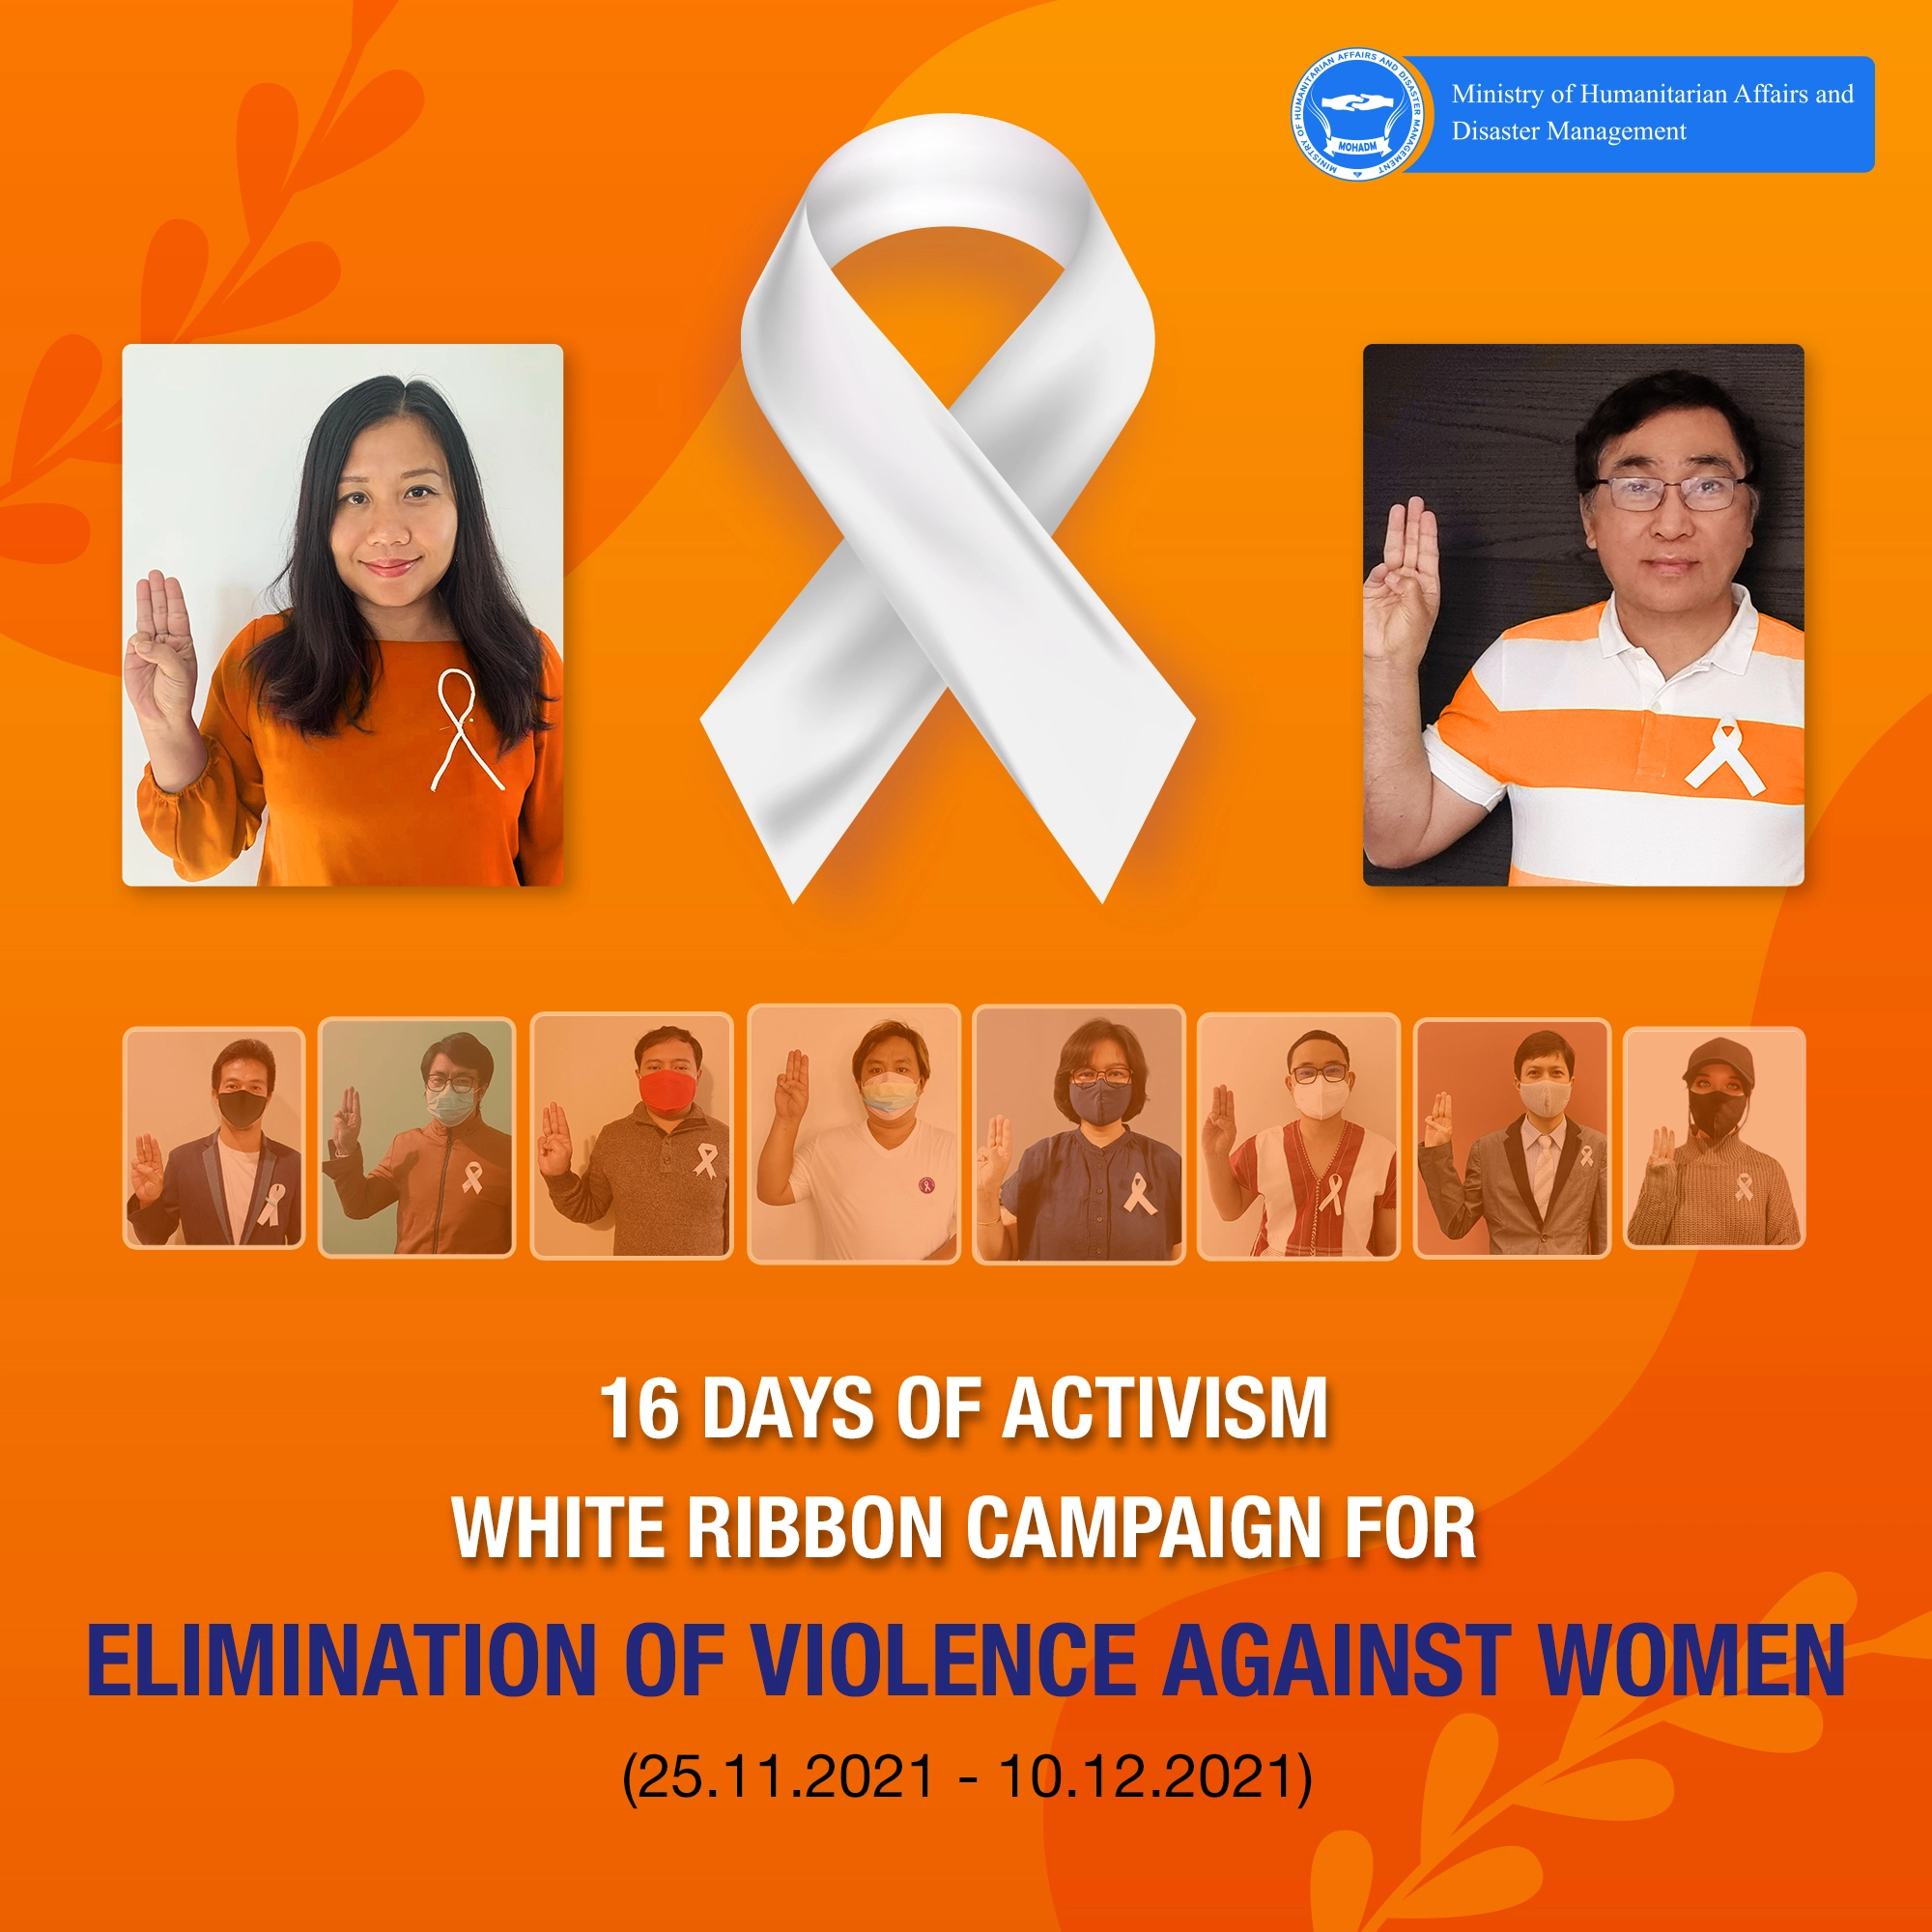 16 Days of Activism from 25.11.2021 to 10.12.2021 (White ribbon campaign)